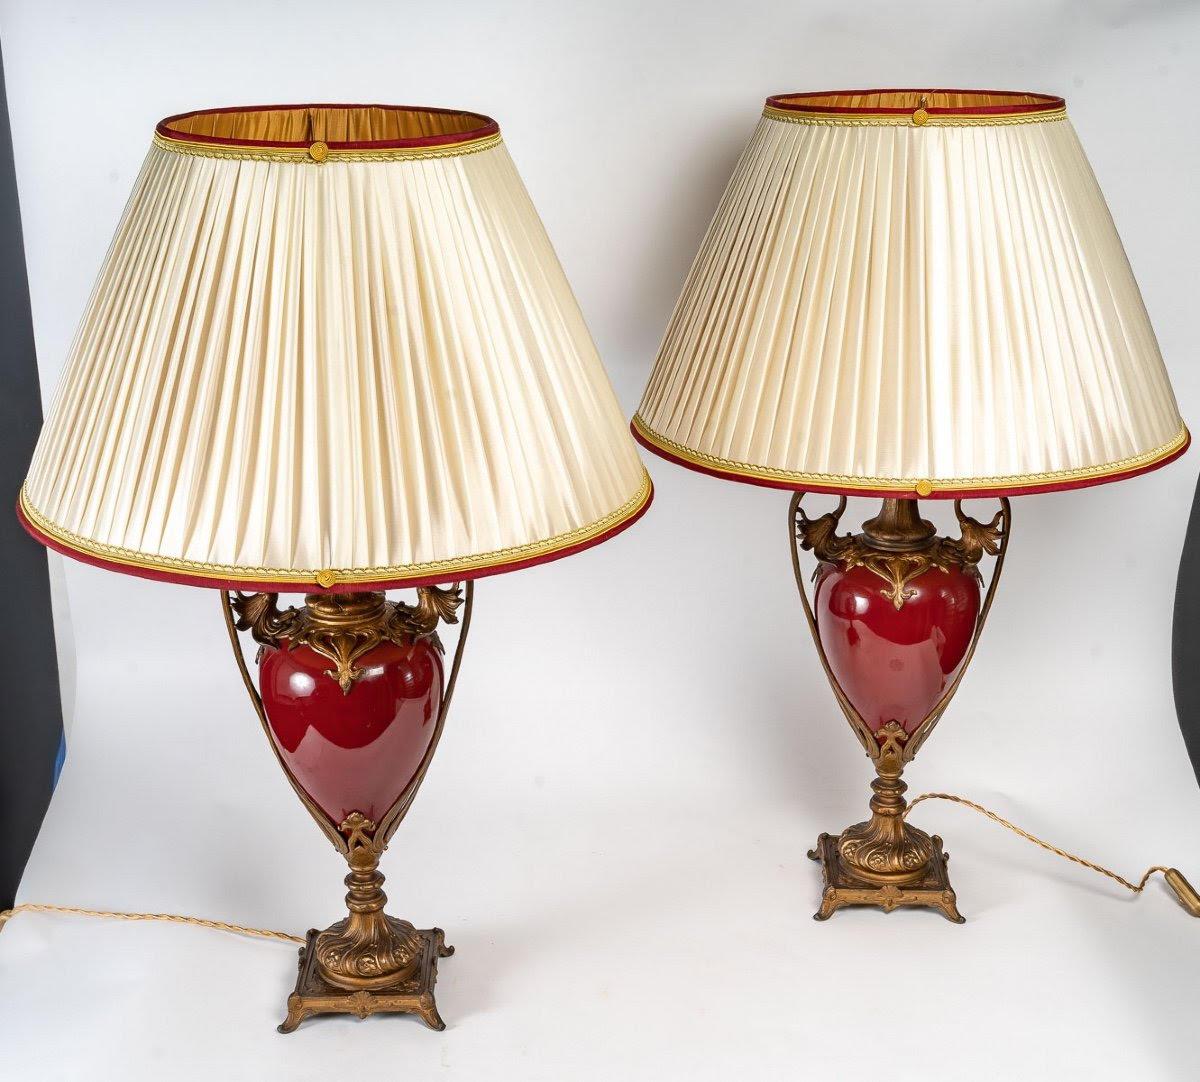 Napoleon III Pair of 19th Century Porcelain and Gilt Bronze Lamps